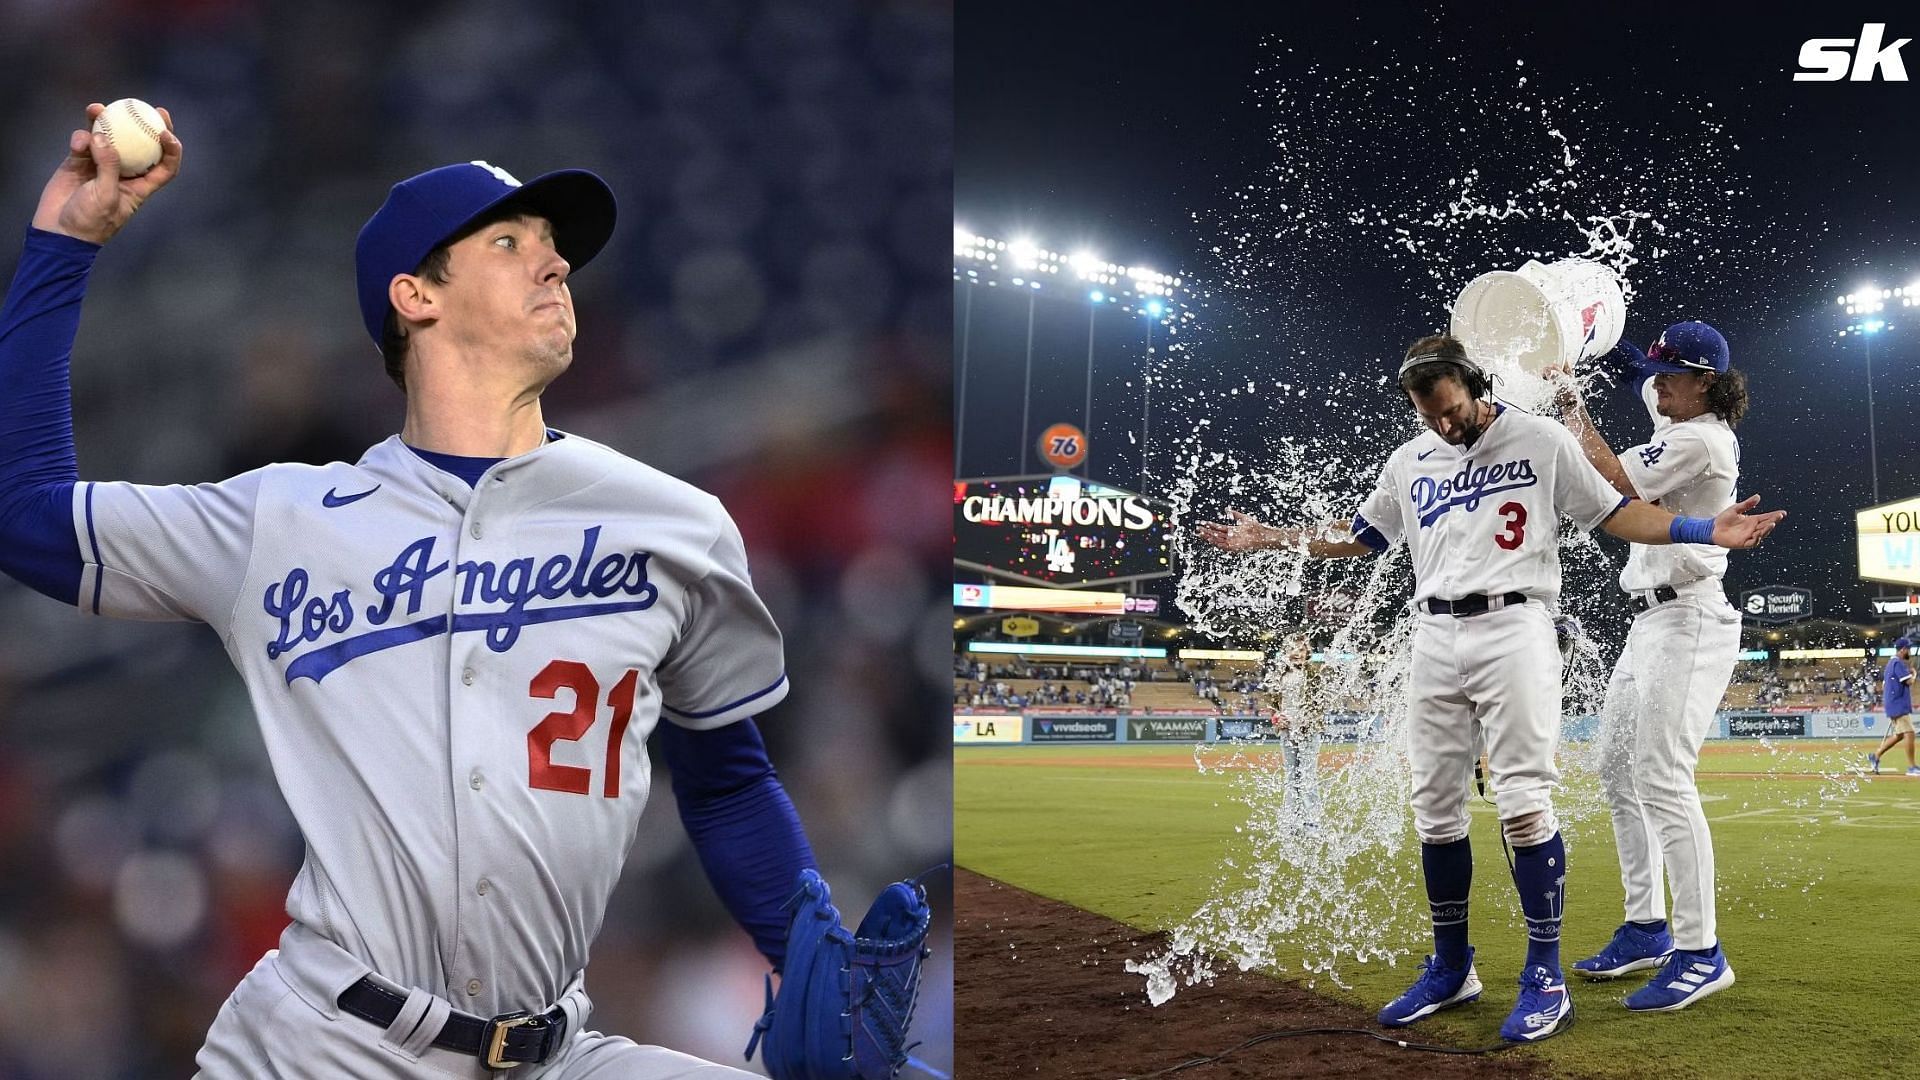 Walker Buehler applauds Dodgers teammates after sublime move in Giants win - &quot;Sickest double play I